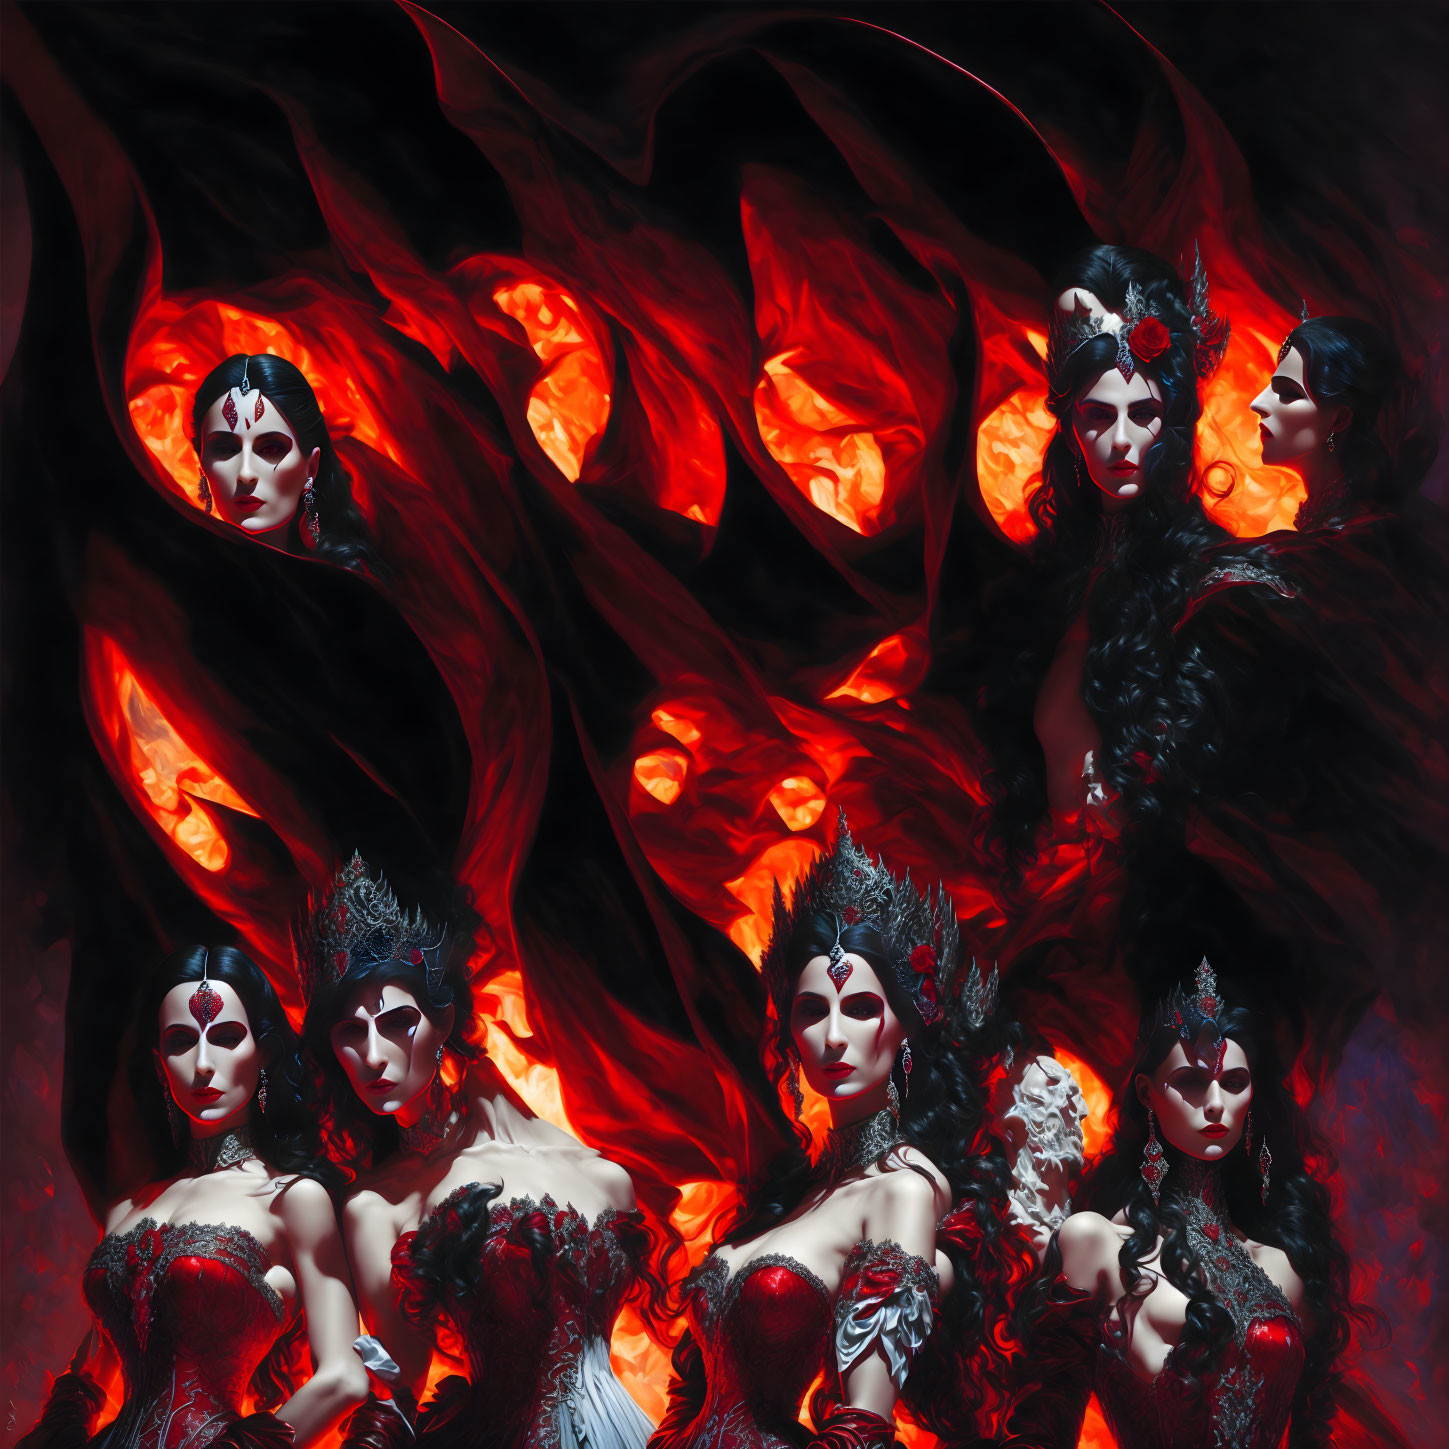 Multiple Women in Red and Black Costumes Among Fiery Abstract Patterns